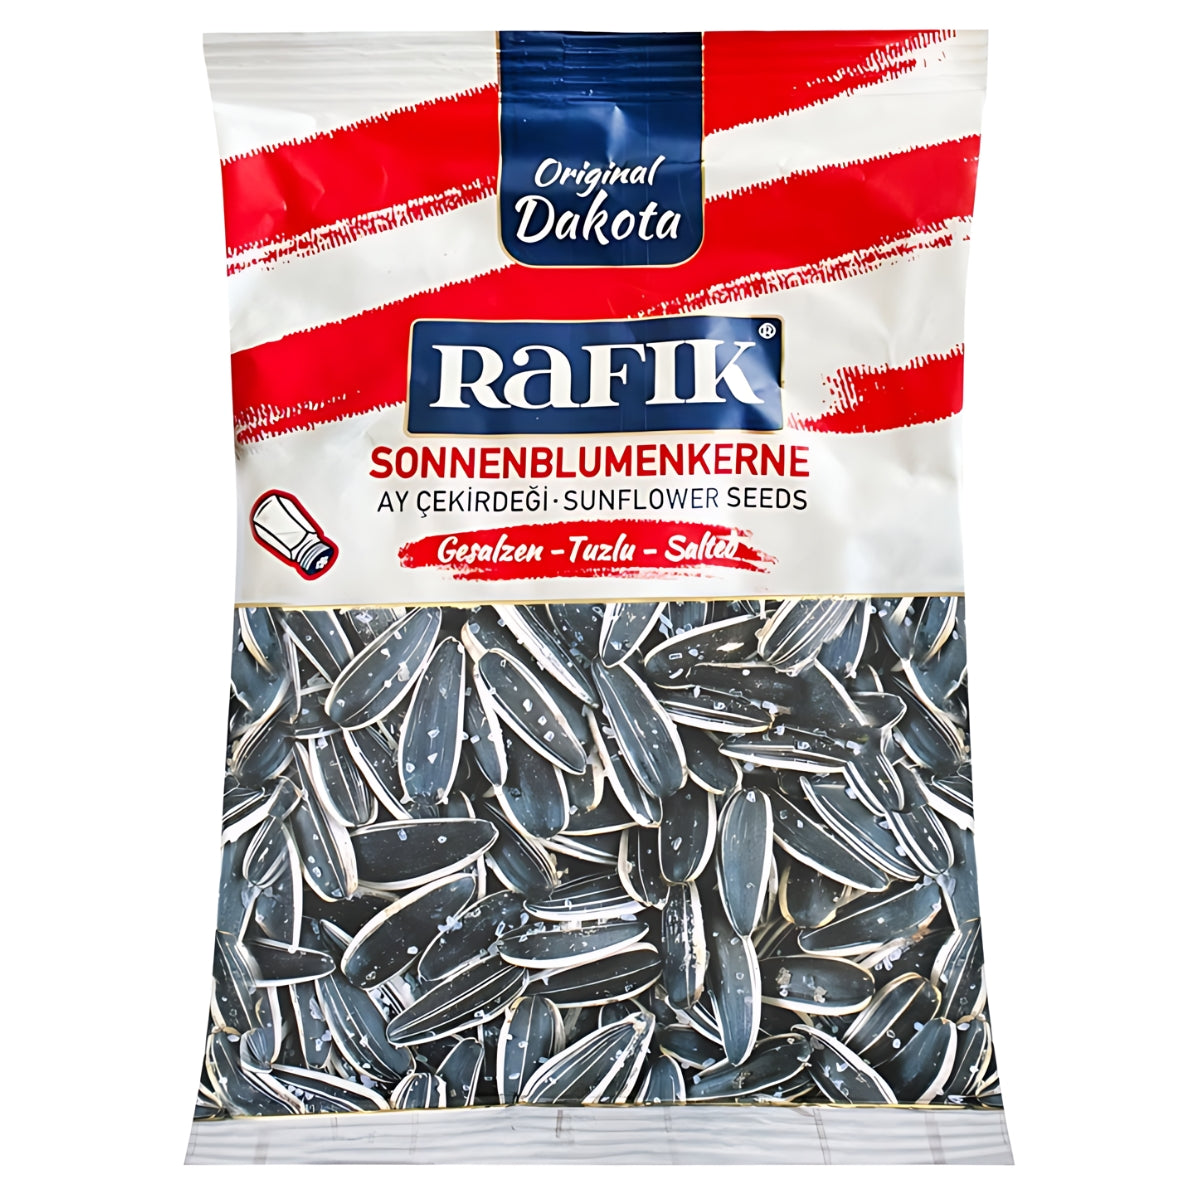 A packet of Rafik - Salted Sunflower Seeds Original Dakota - 150g, a protein-rich snack, featuring a red, white, and blue design on the packaging. The brand name "Original Dakota" is prominently displayed at the top.